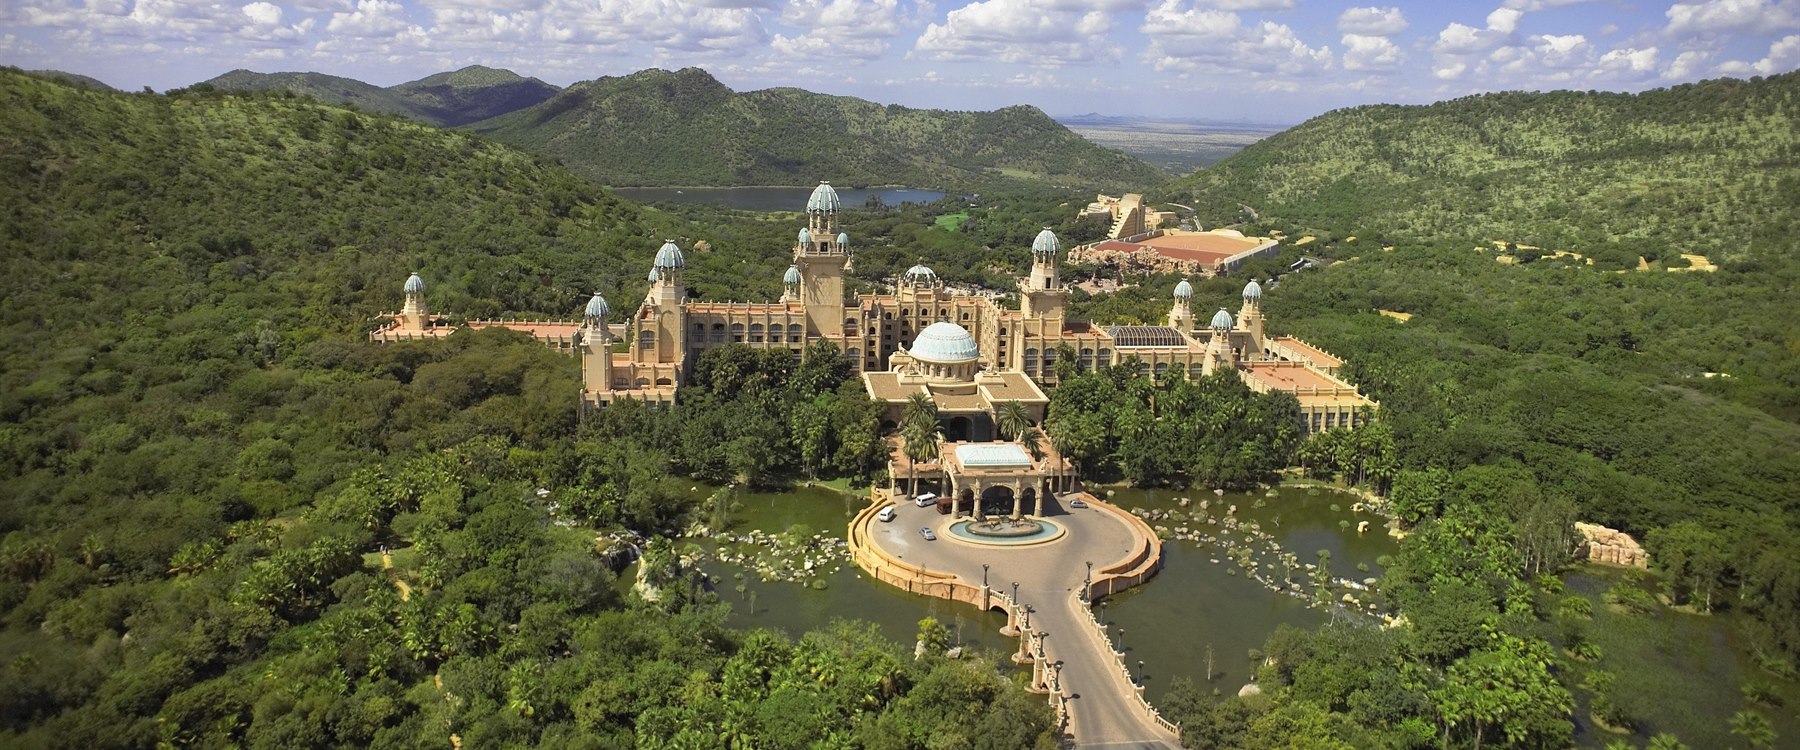 palace of the lost city packages